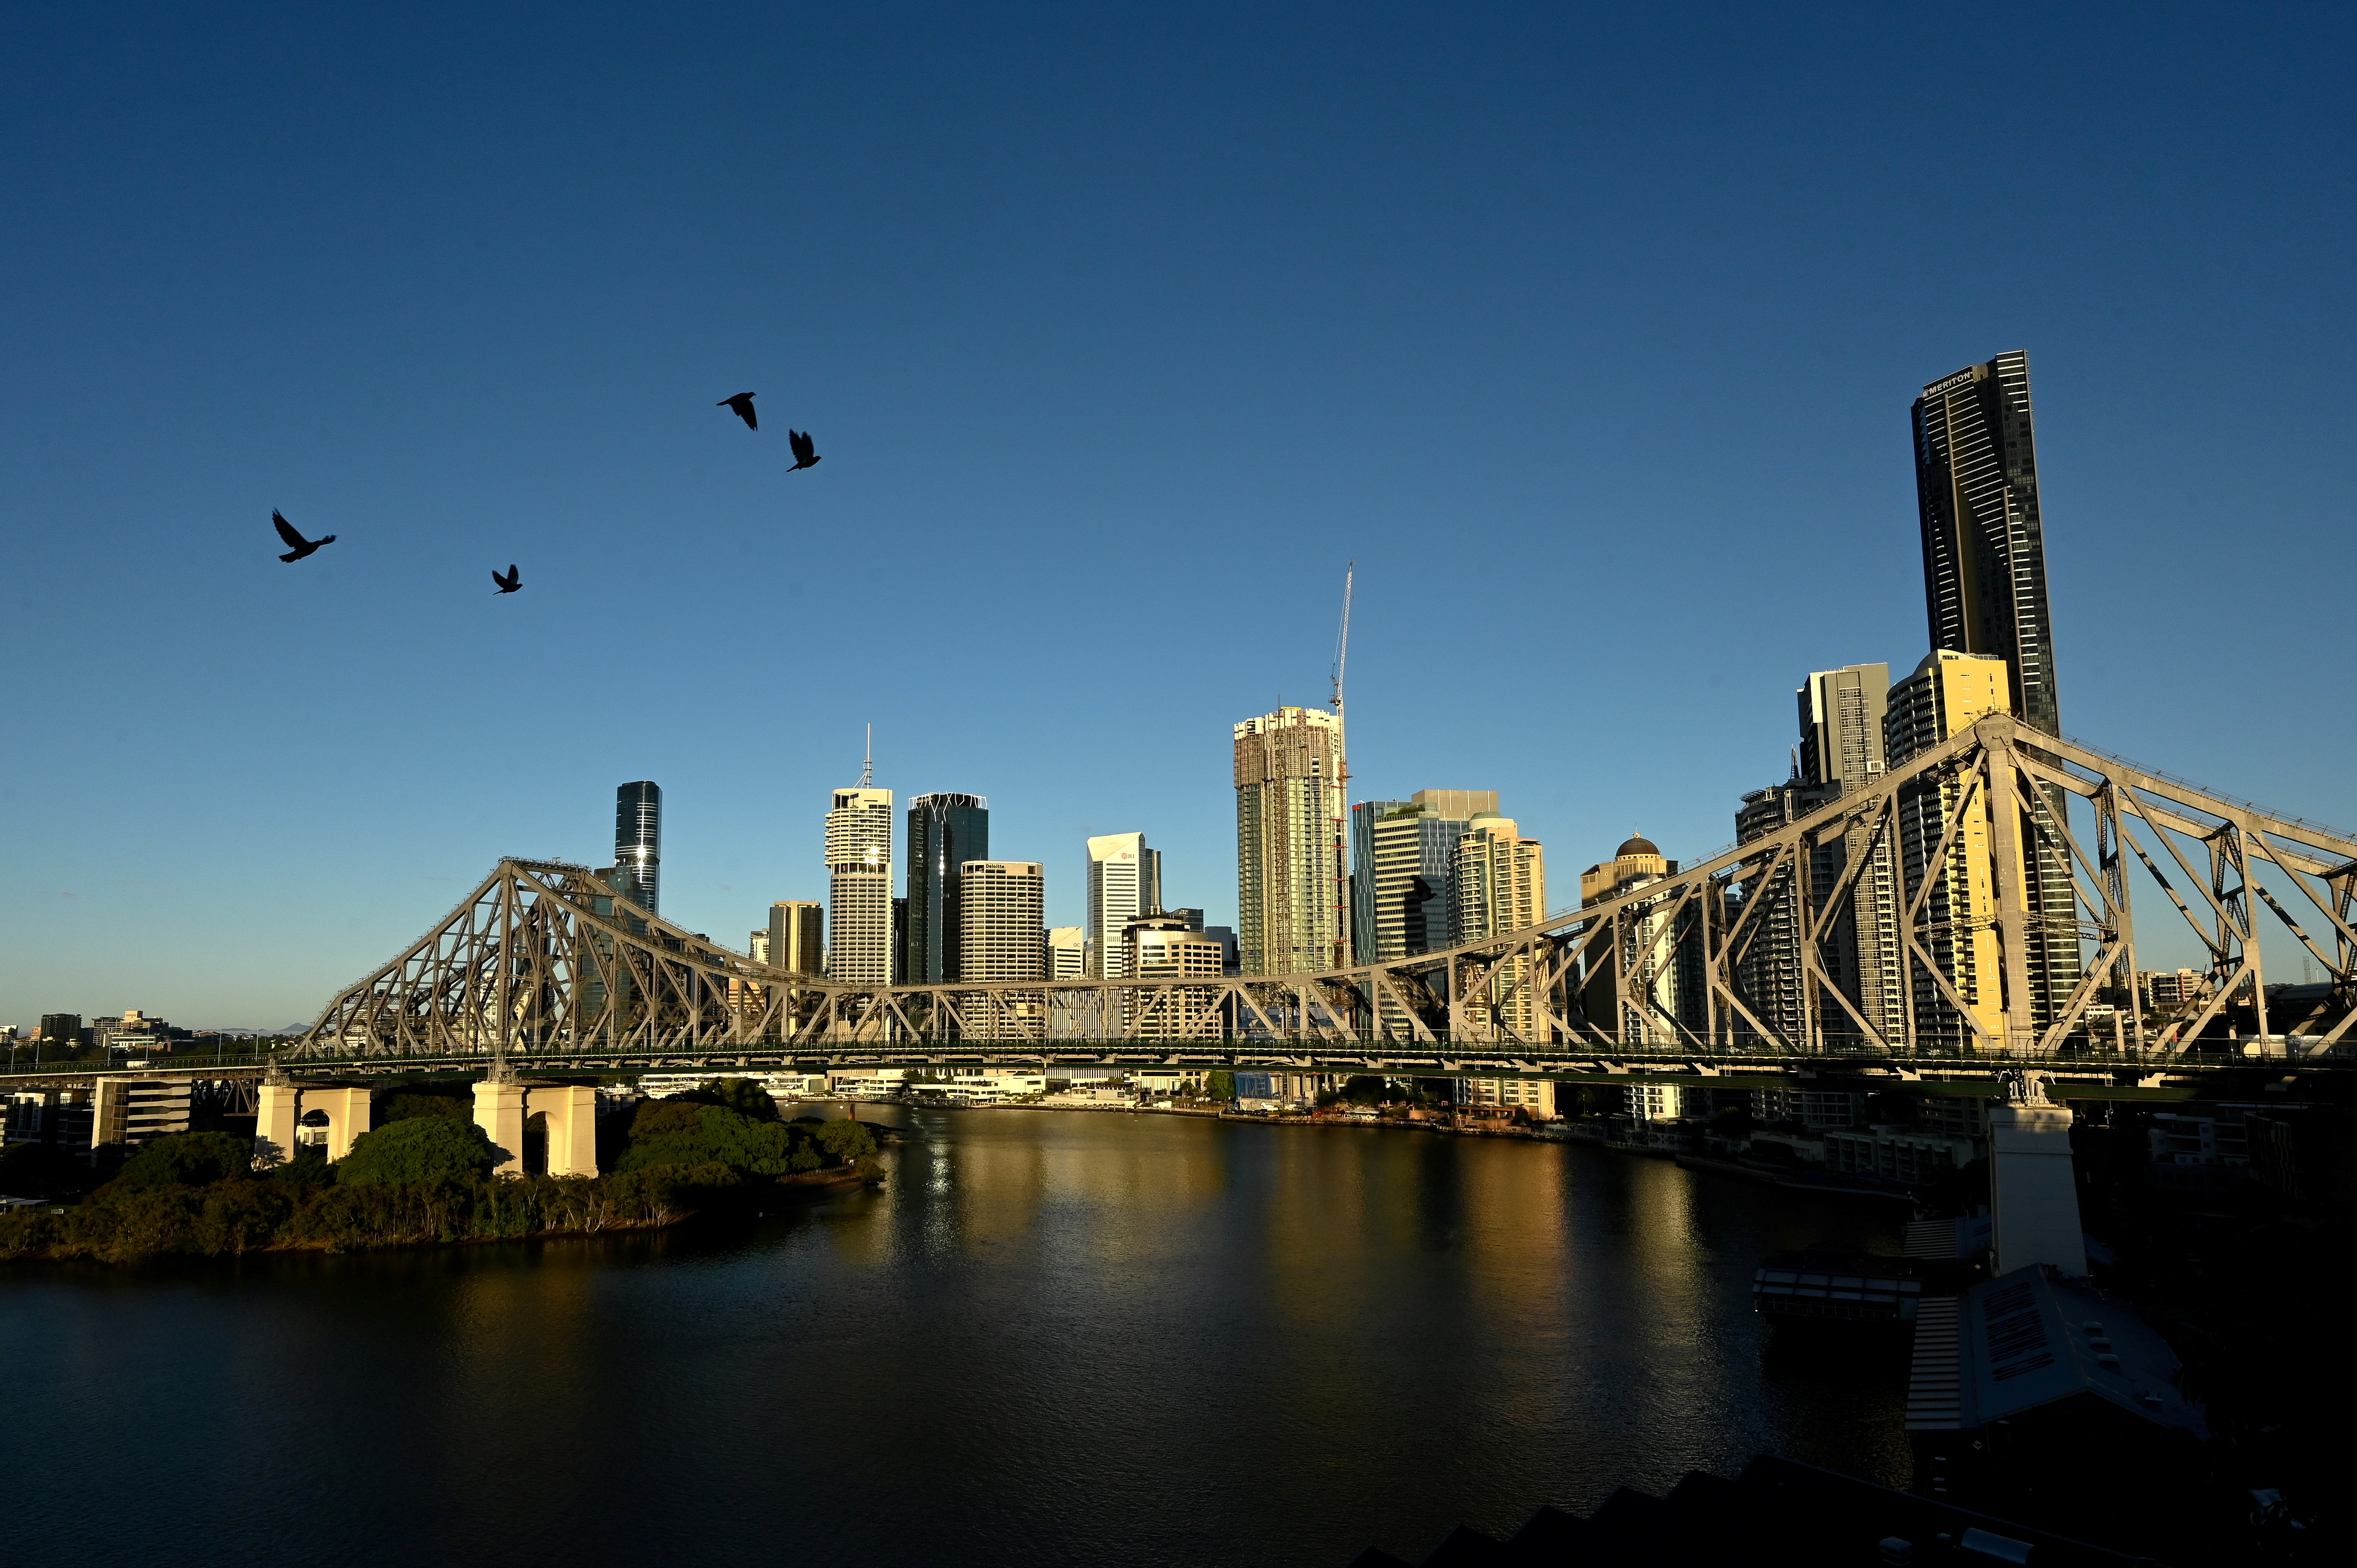 A view of the city skyline of Brisbane